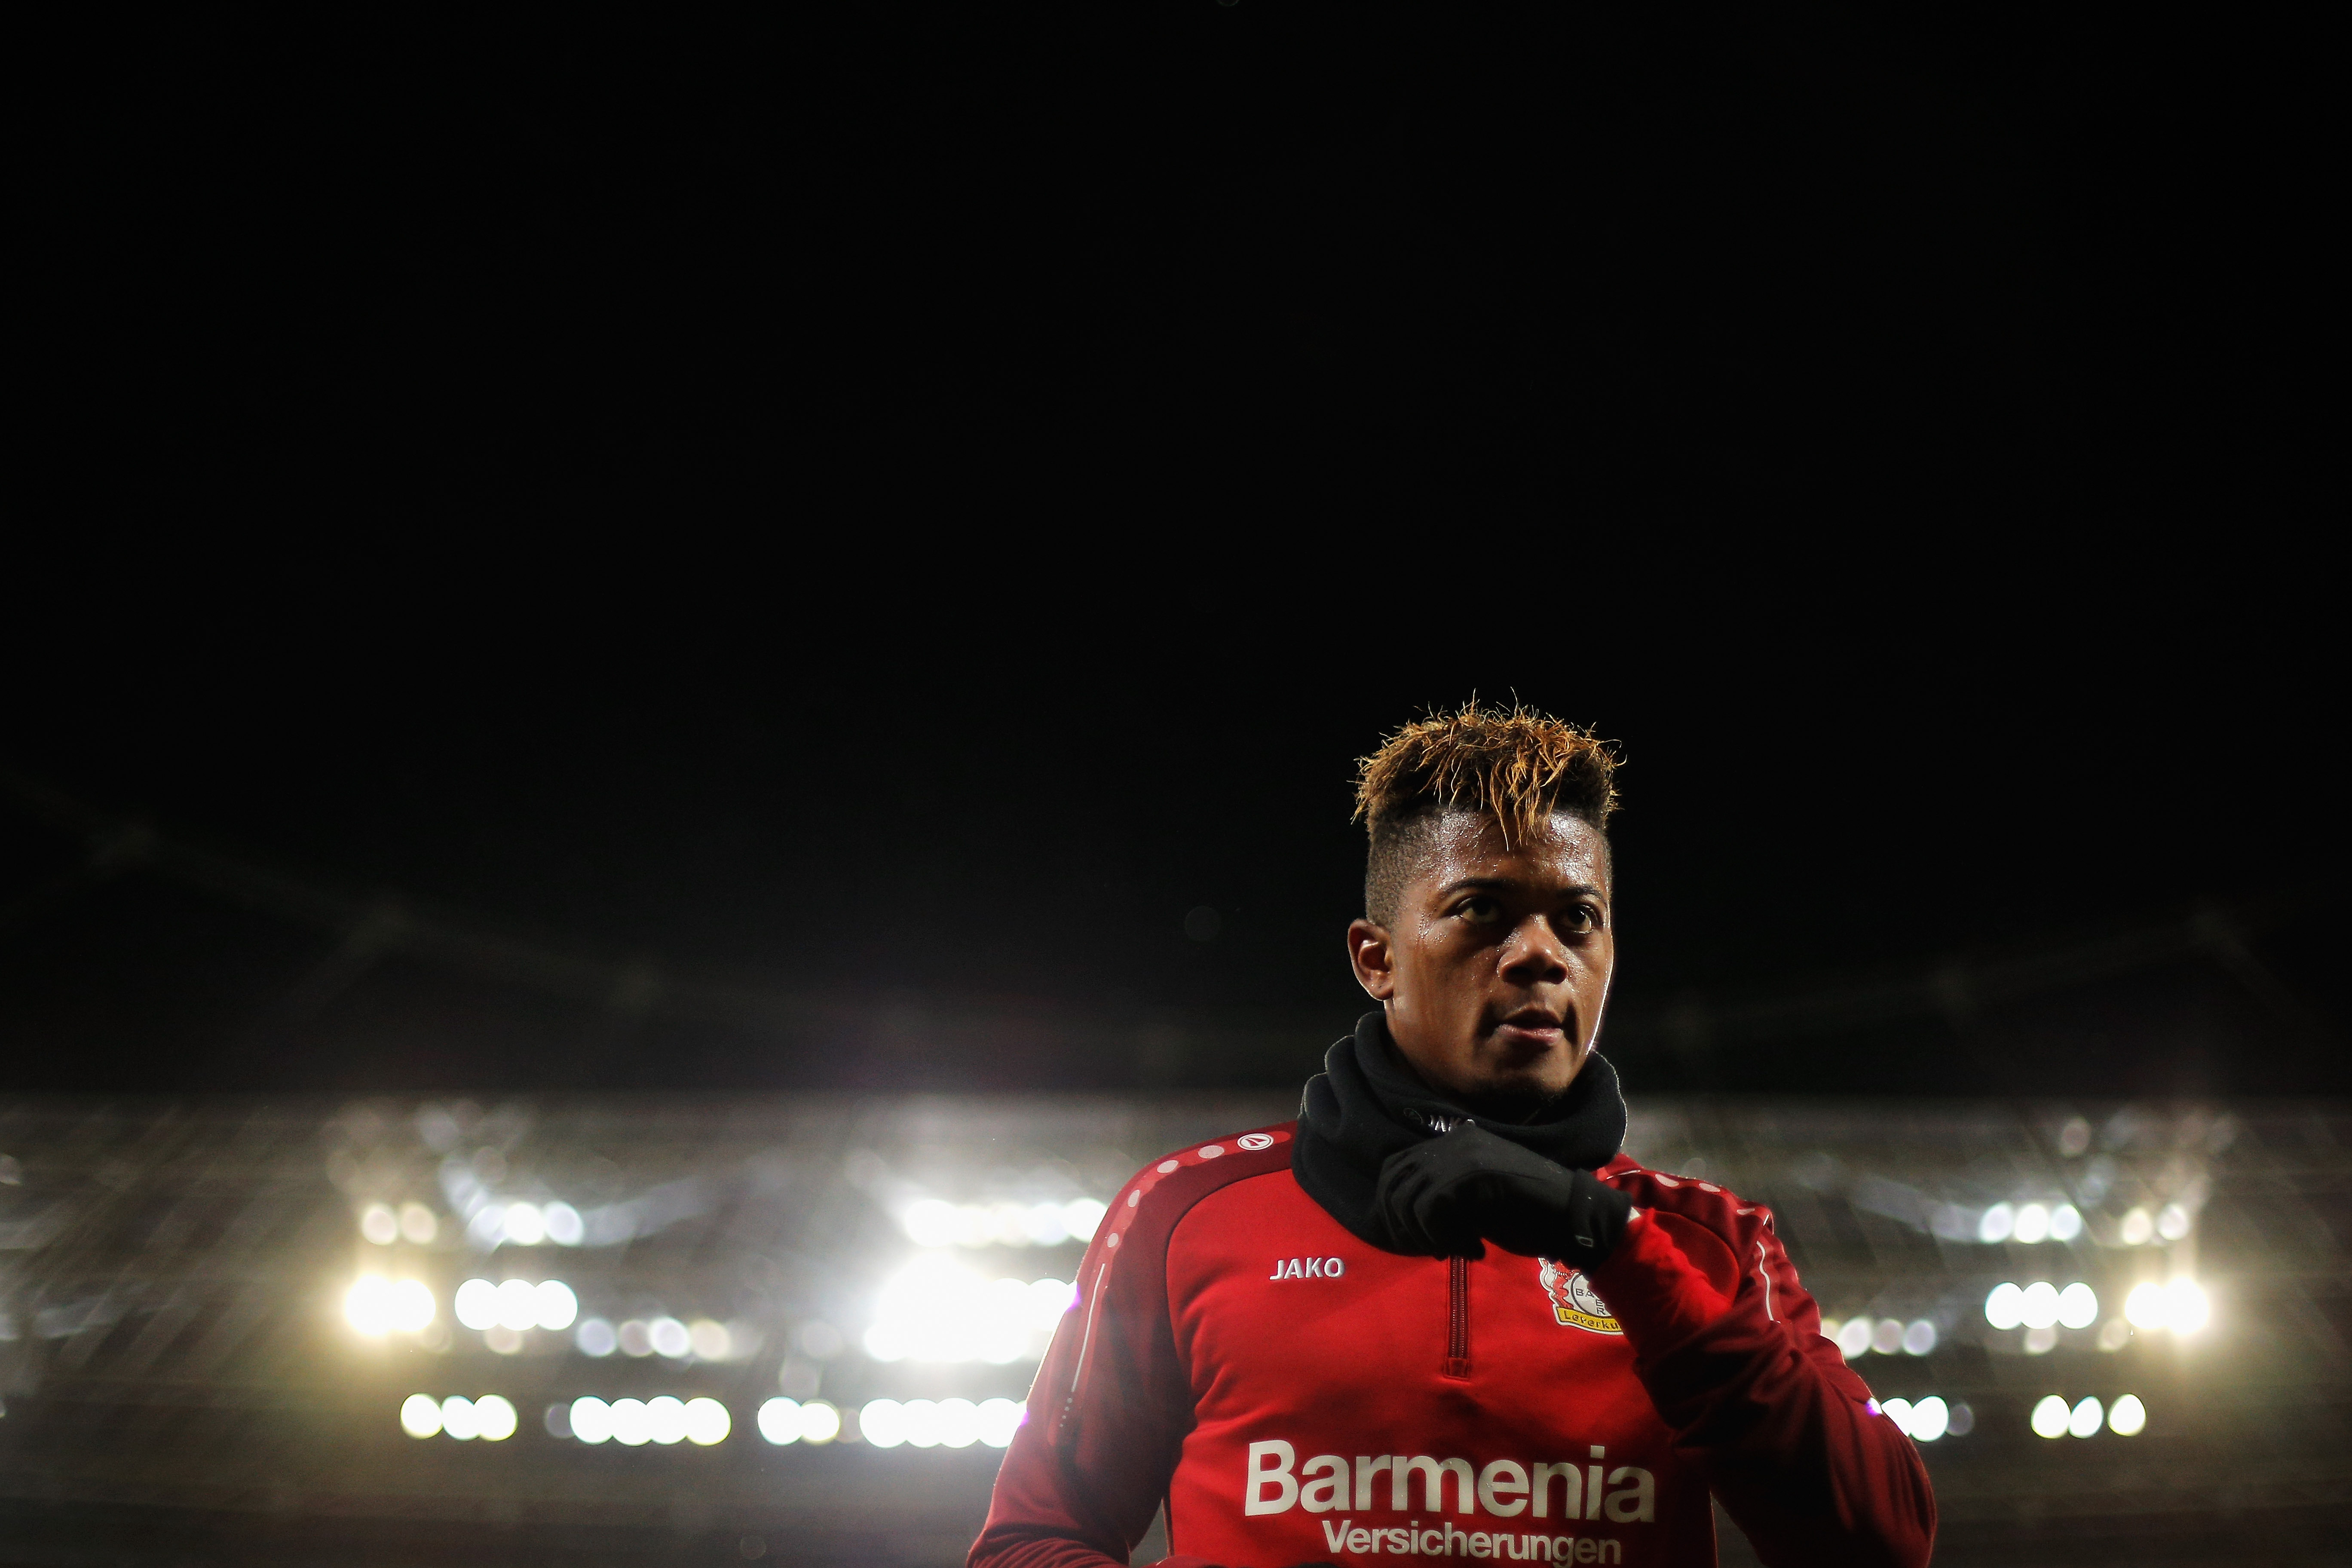 LEVERKUSEN, GERMANY - DECEMBER 13:  Leon Bailey of Bayer 04 Leverkusen looks on prior to the Bundesliga match between Bayer 04 Leverkusen and SV Werder Bremen at BayArena on December 13, 2017 in Leverkusen, Germany.  (Photo by Dean Mouhtaropoulos/Bongarts/Getty Images)